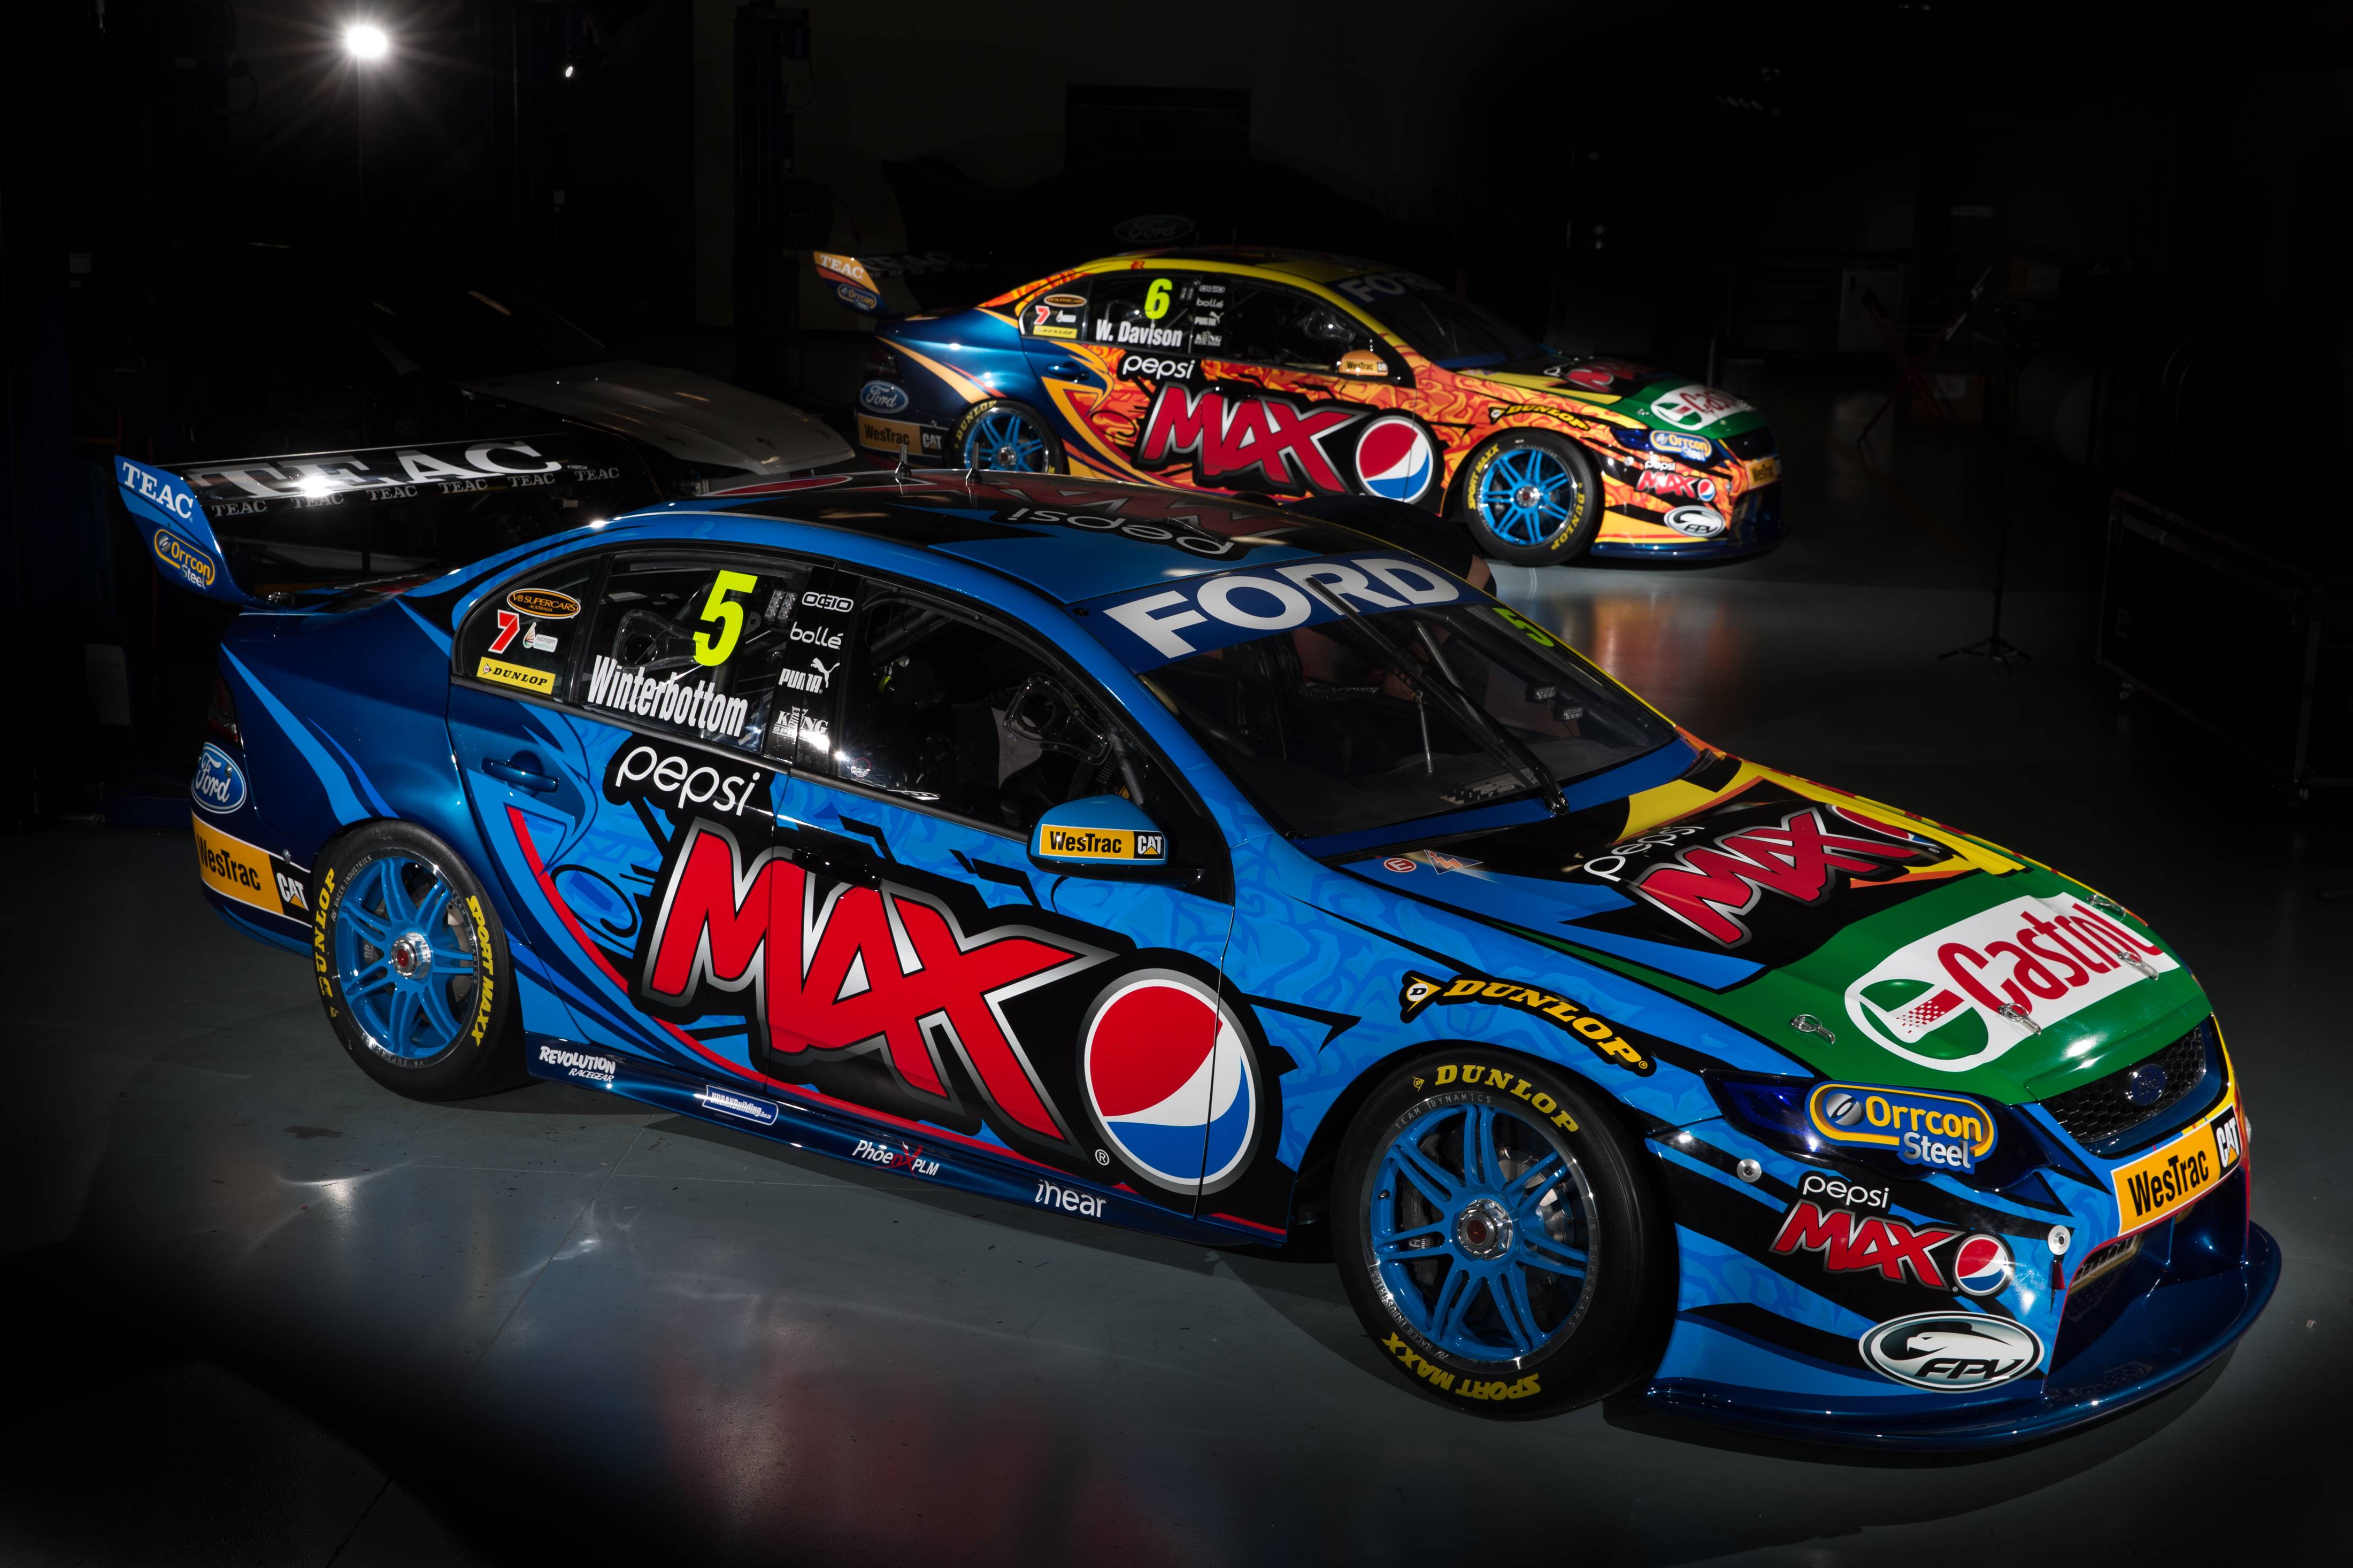 V8 Supercars Wallpapers